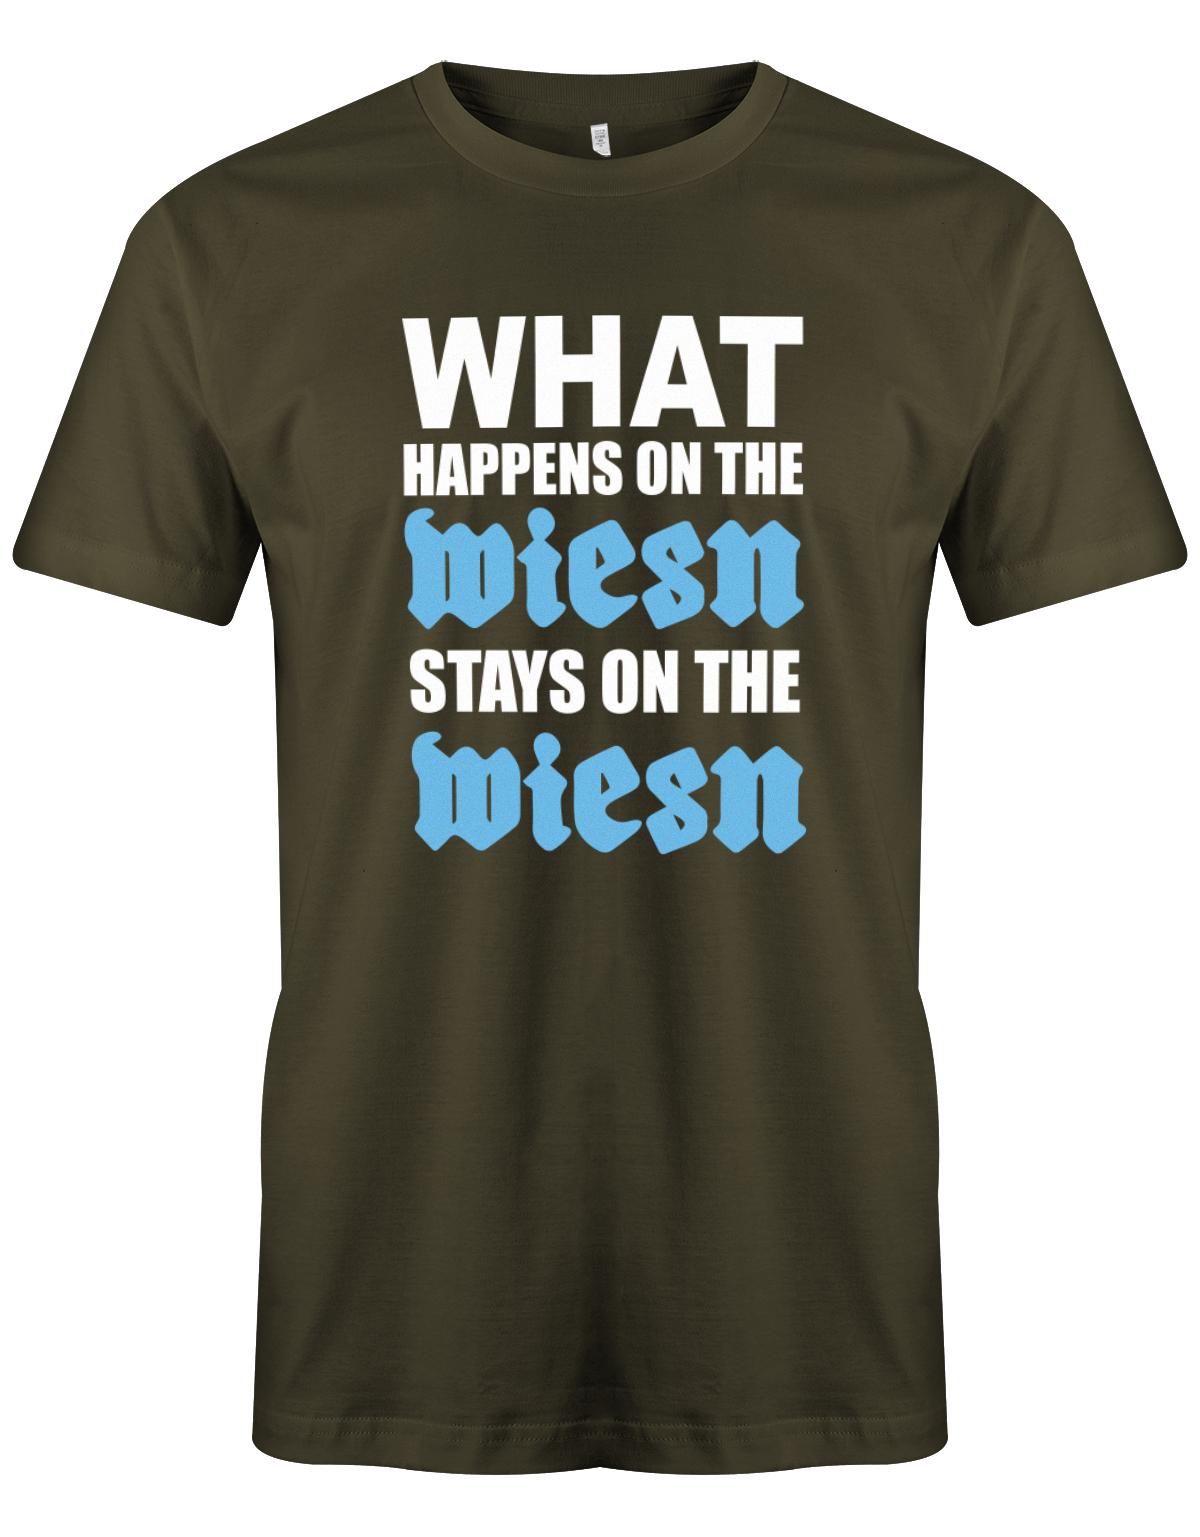 What-happens-on-the-wiesn-stay-on-the-wiesn-herren-shirt-army